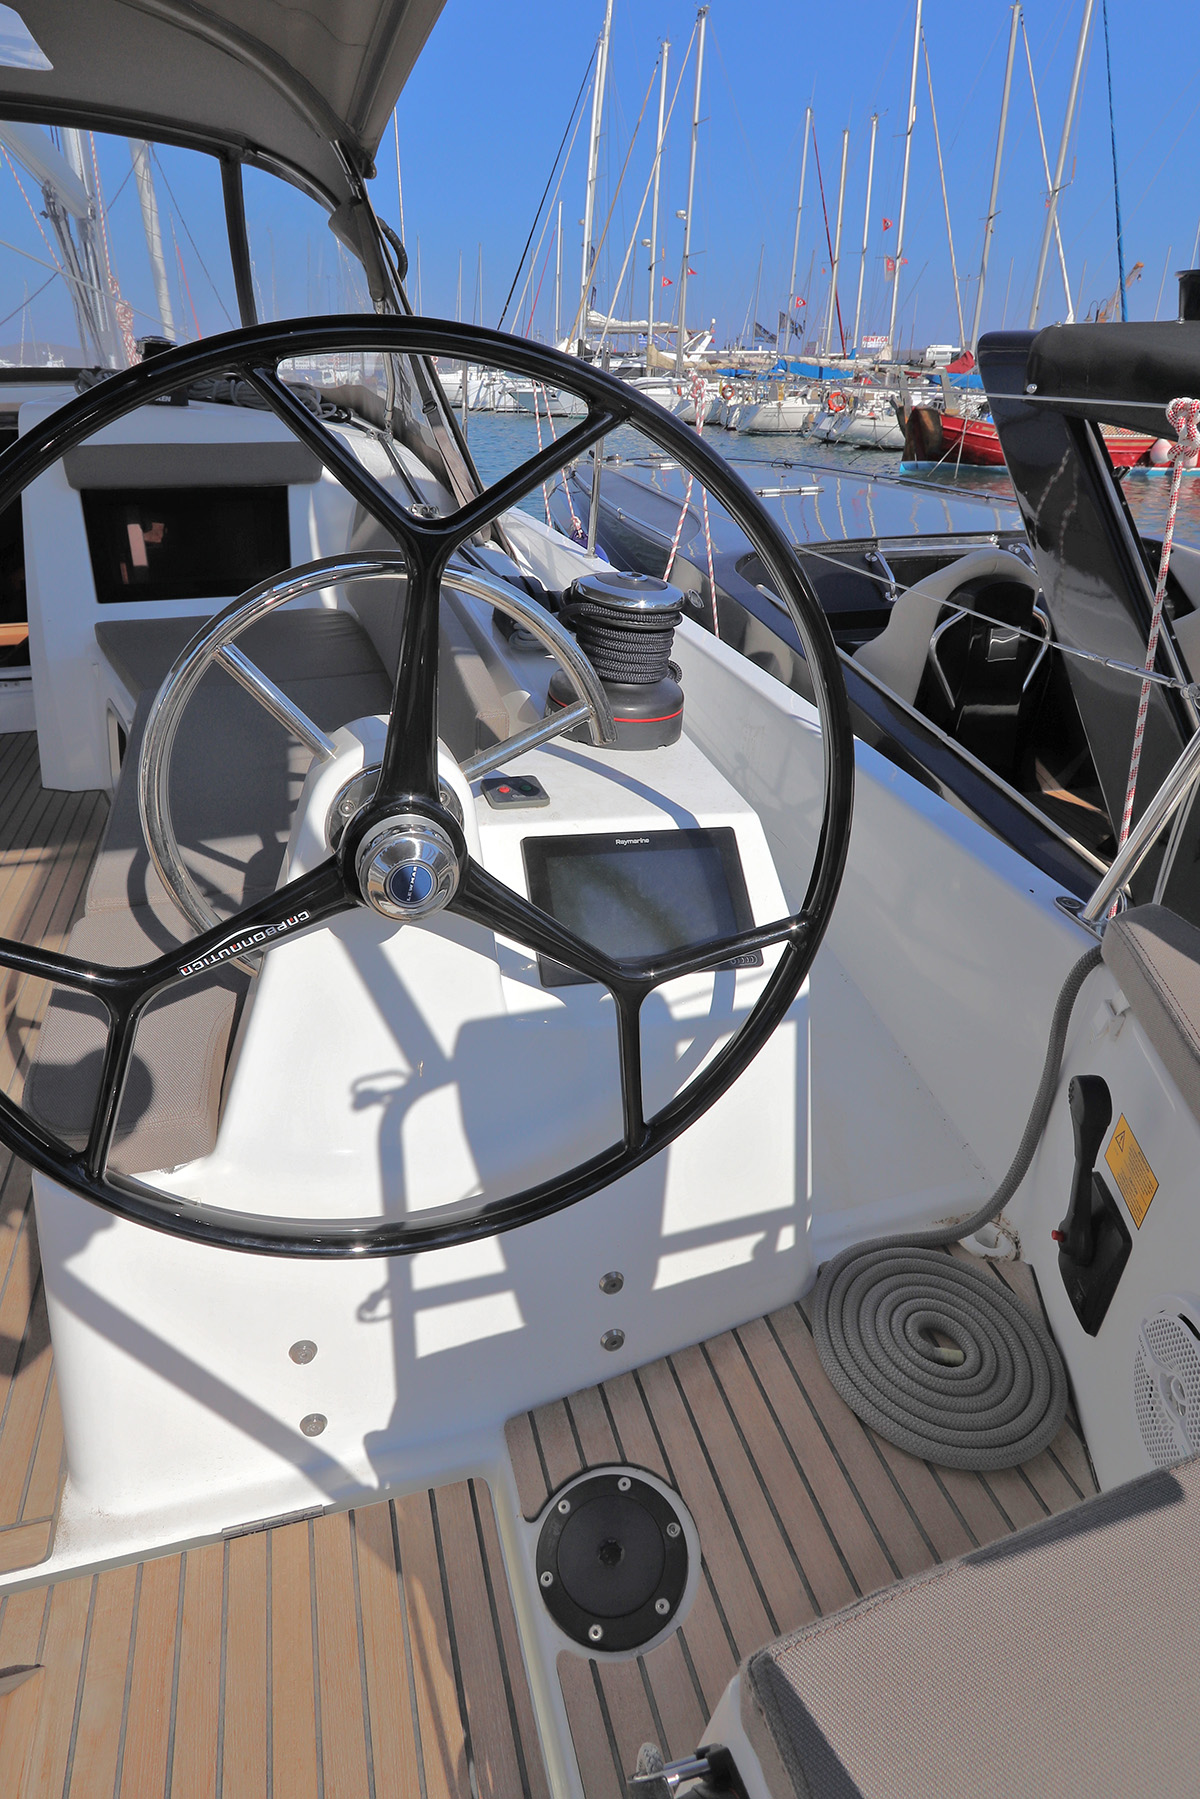 Sun Odyssey 410 - 3 cab. - Yacht Charter Lavrion & Boat hire in Greece Athens and Saronic Gulf Lavrion Lavrion Main Port 5